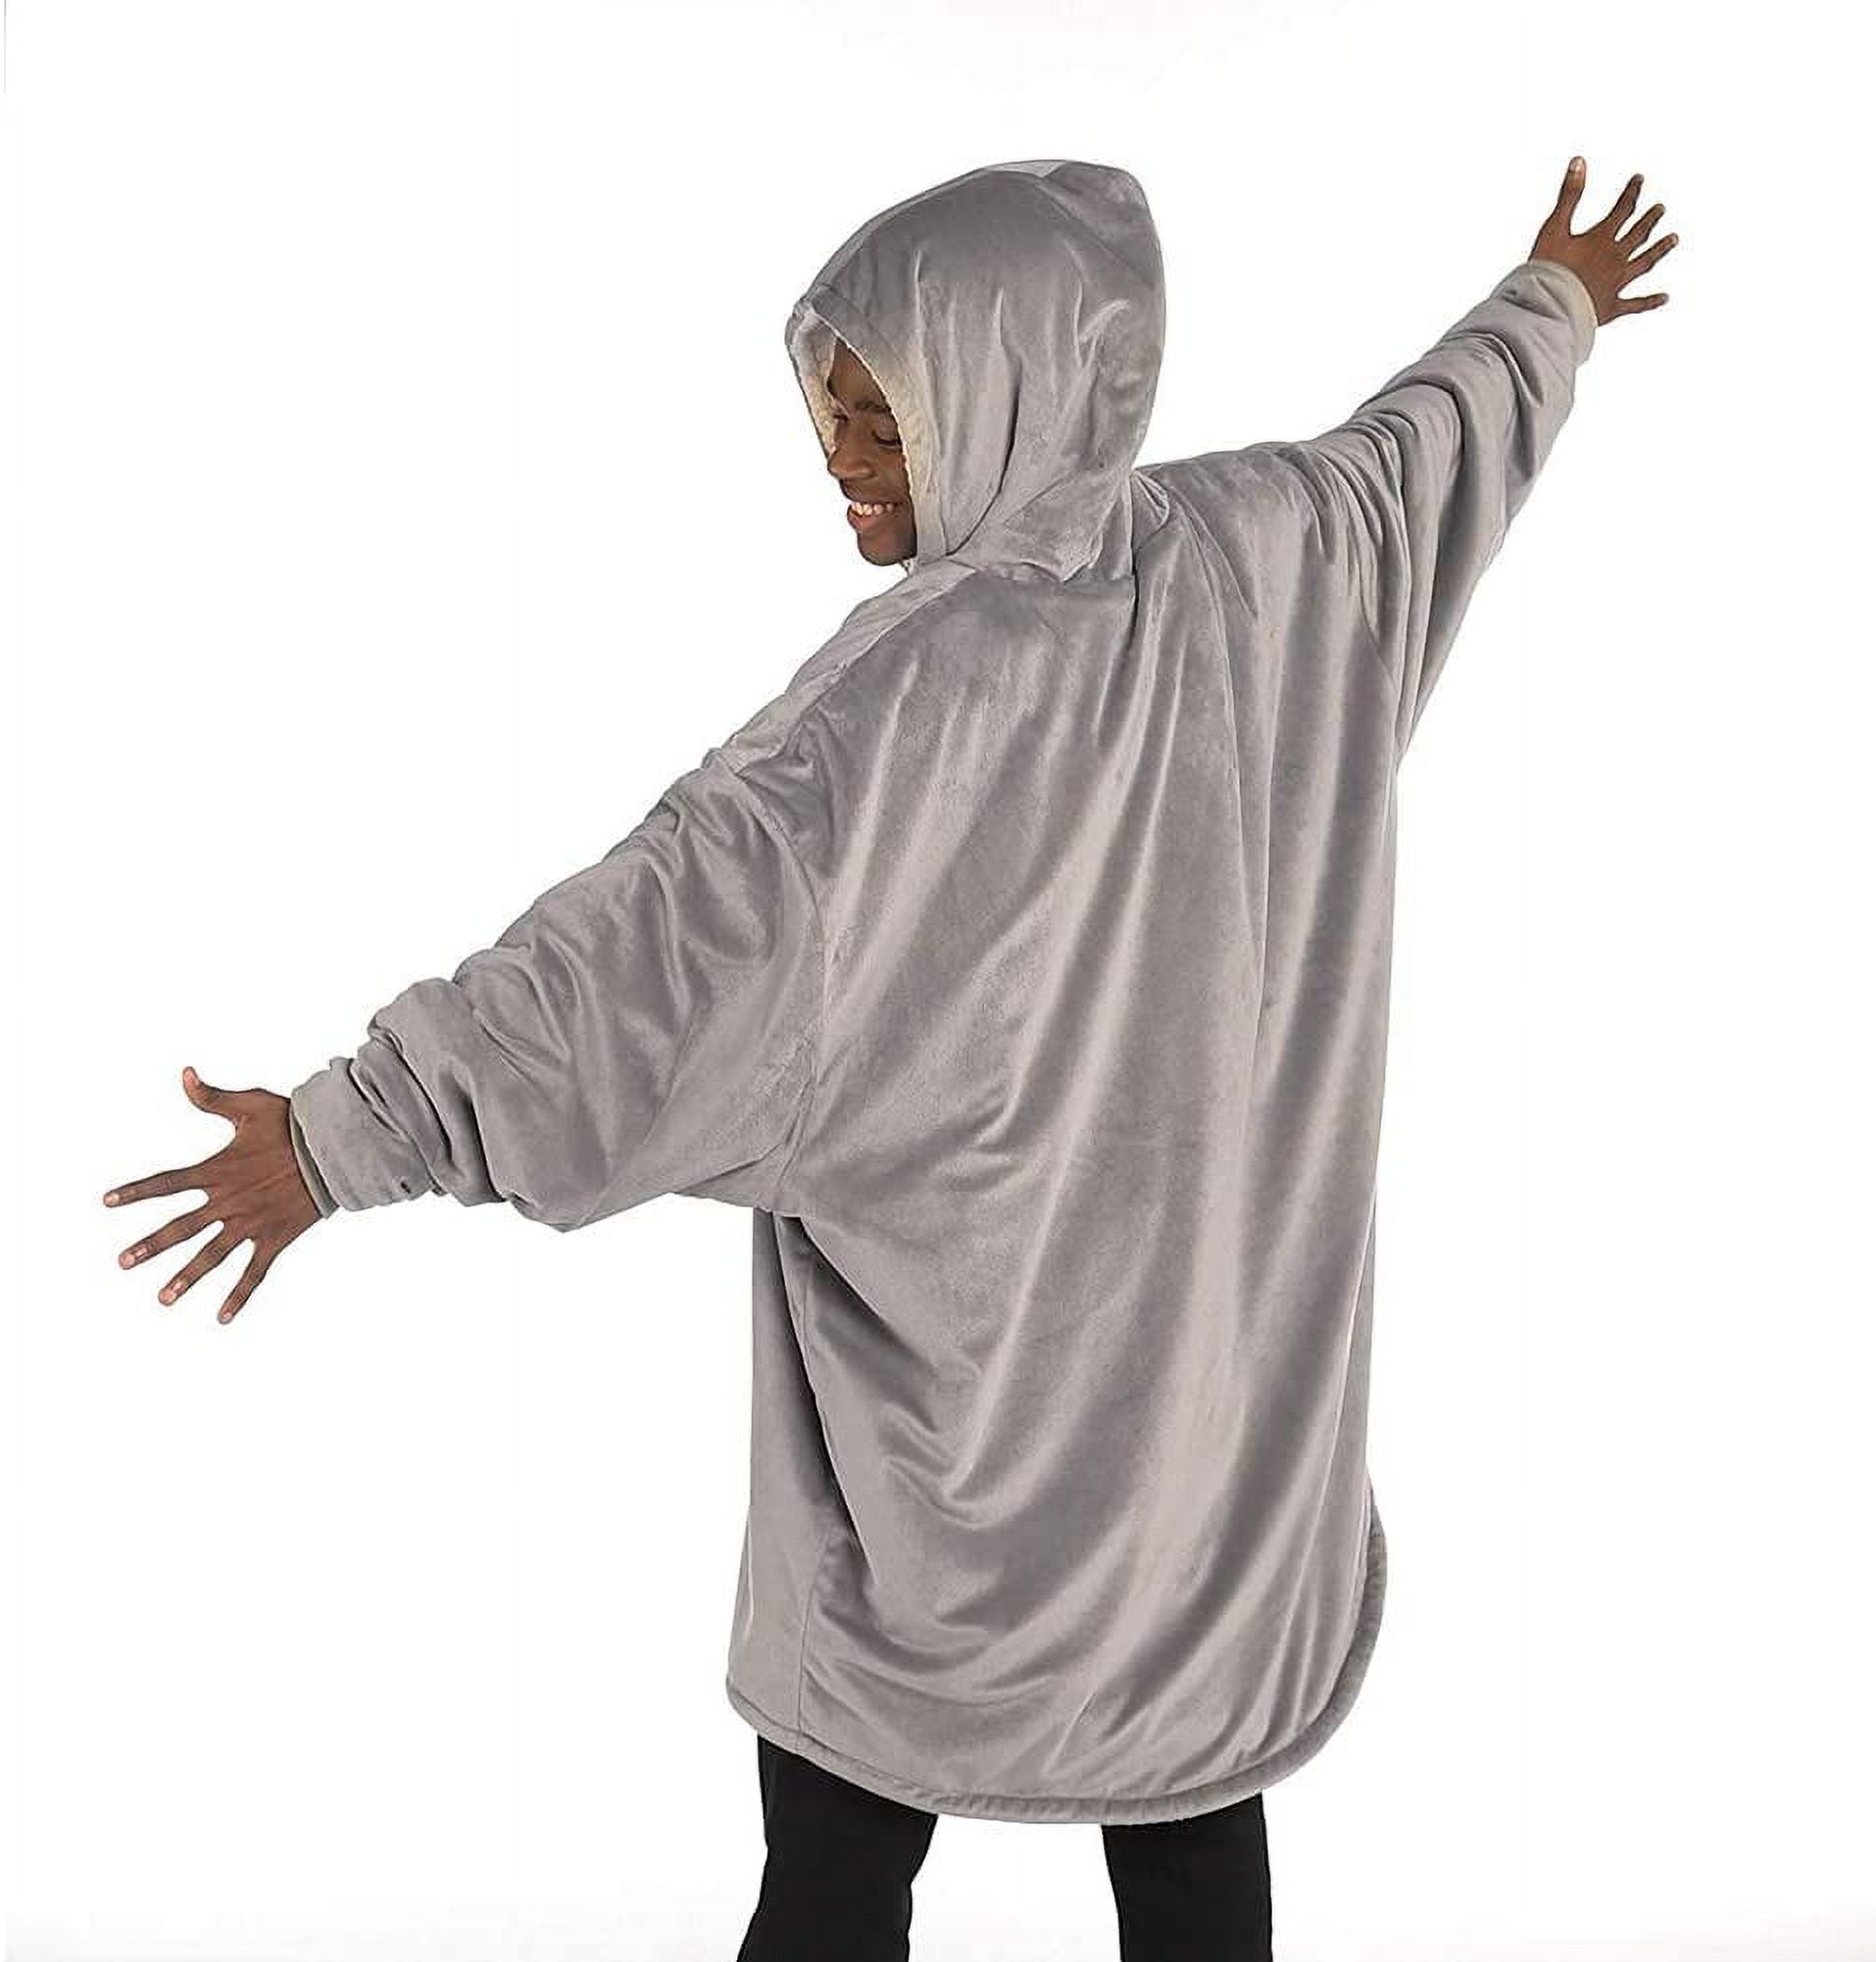 The Comfy Original Oversized Microfiber Wearable Blanket for Adults, Grey - image 2 of 5